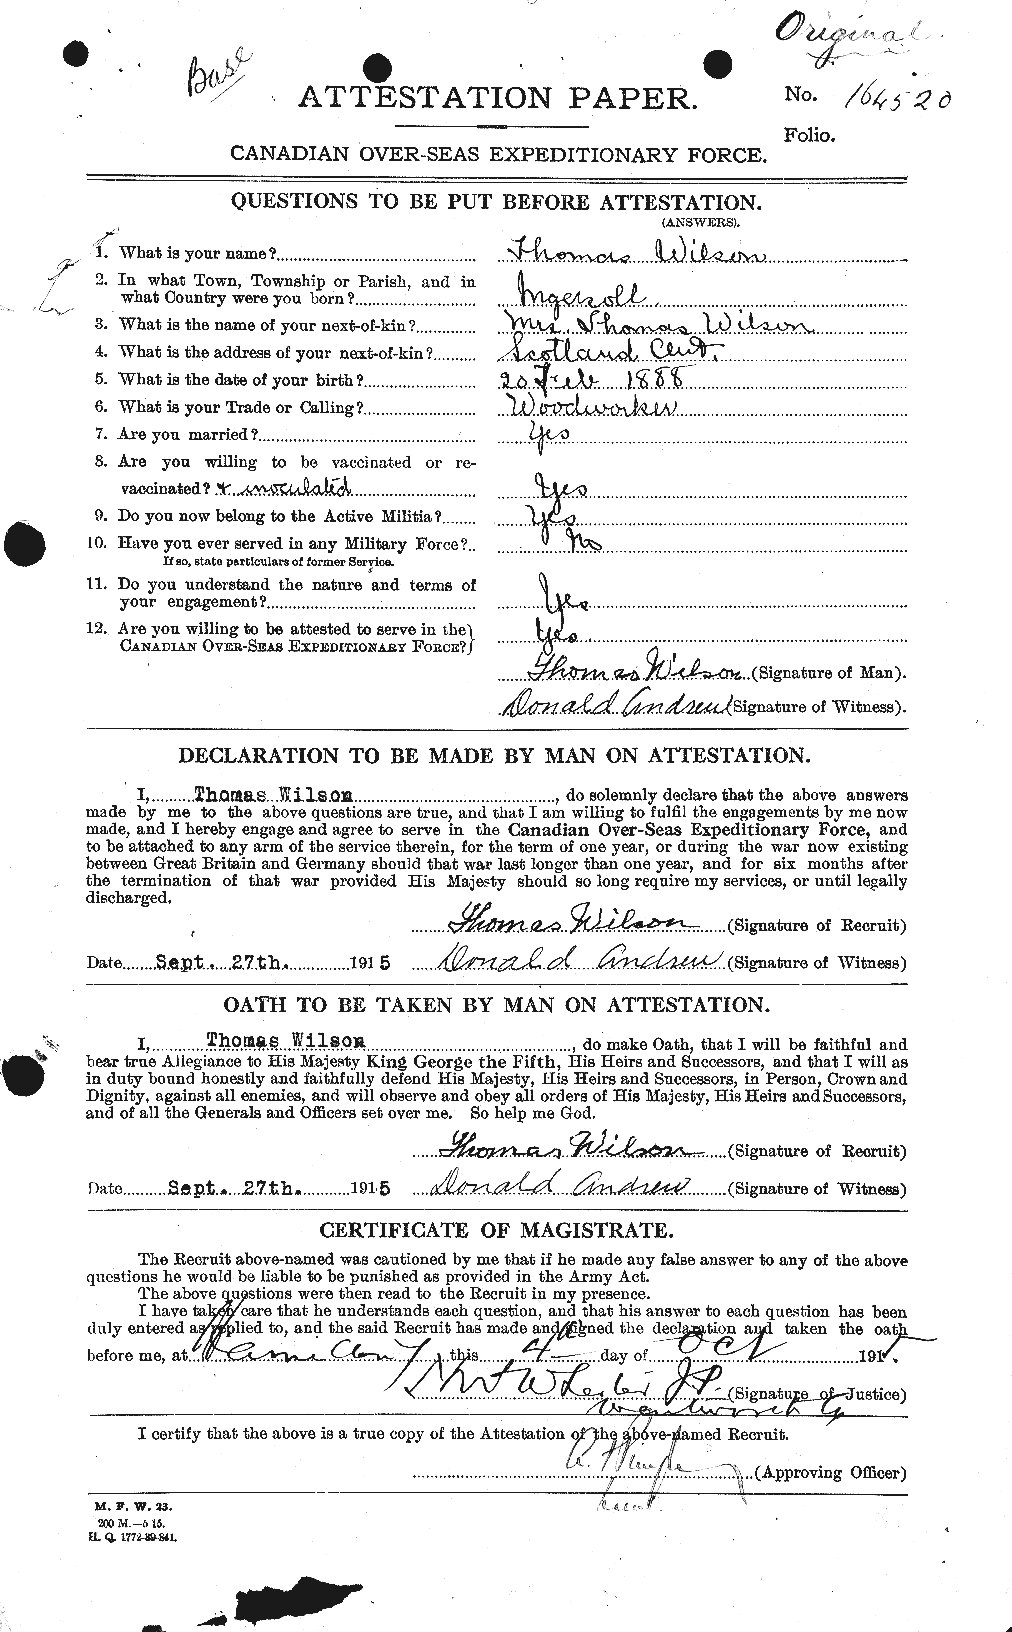 Personnel Records of the First World War - CEF 681224a